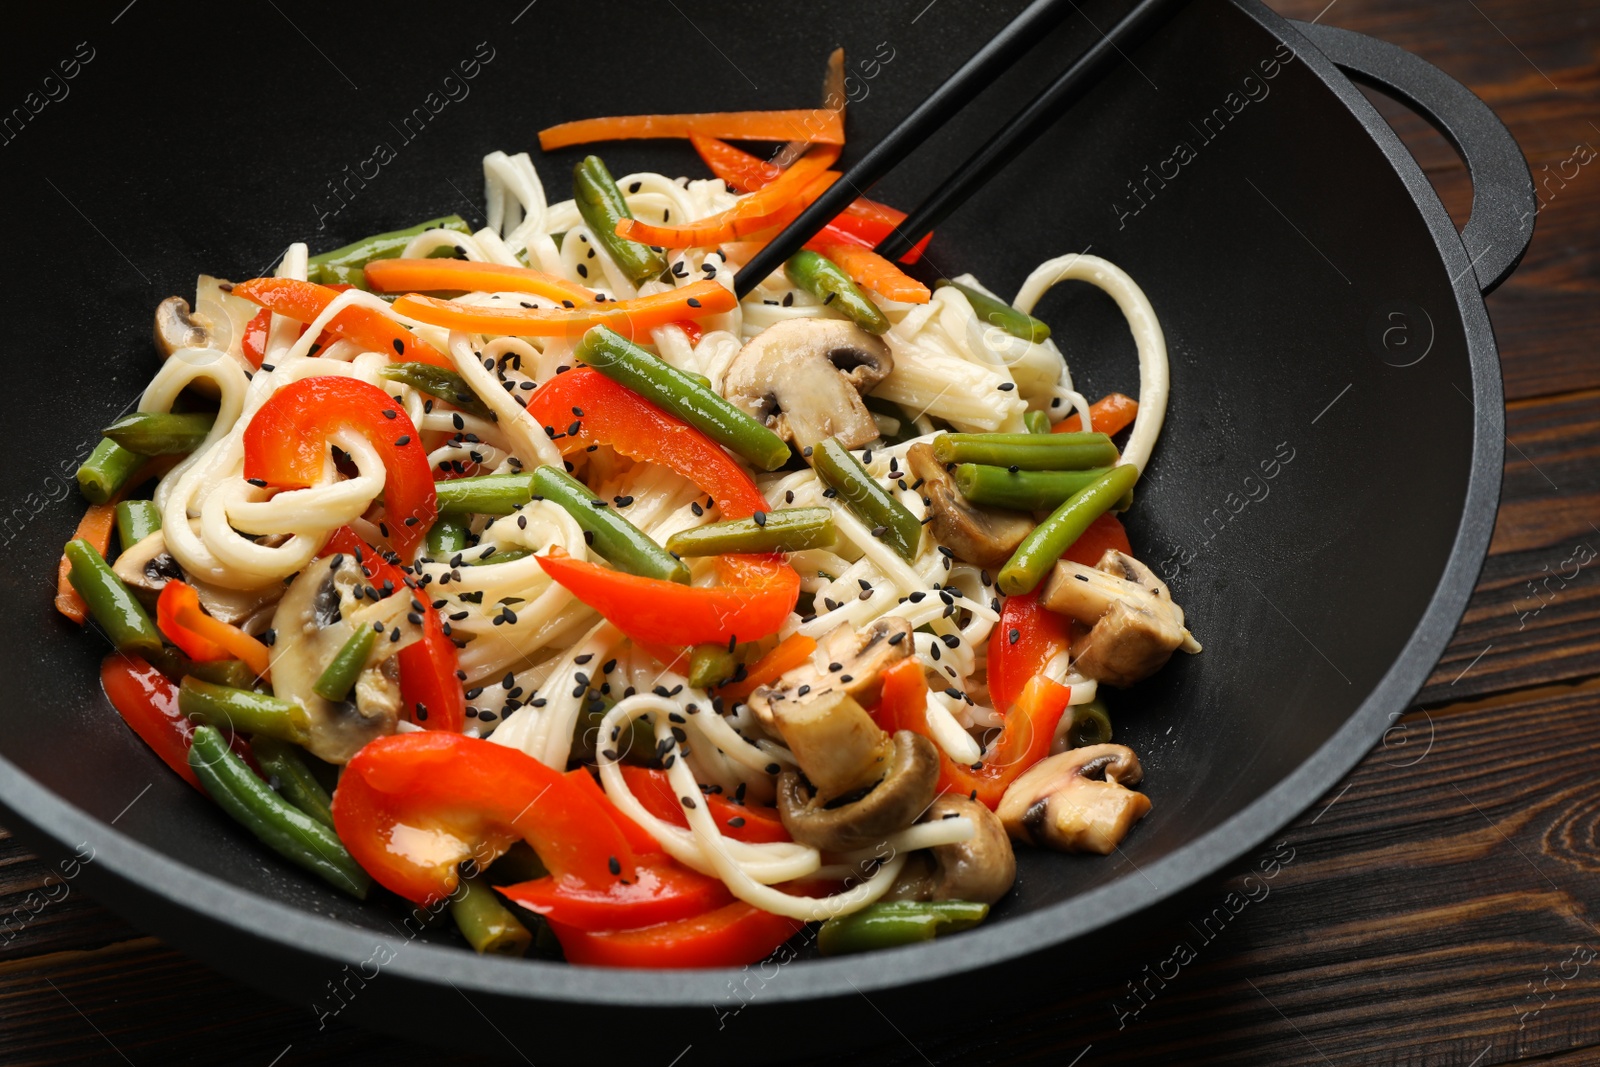 Photo of Stir fried noodles with mushrooms and vegetables in wok on wooden table, closeup